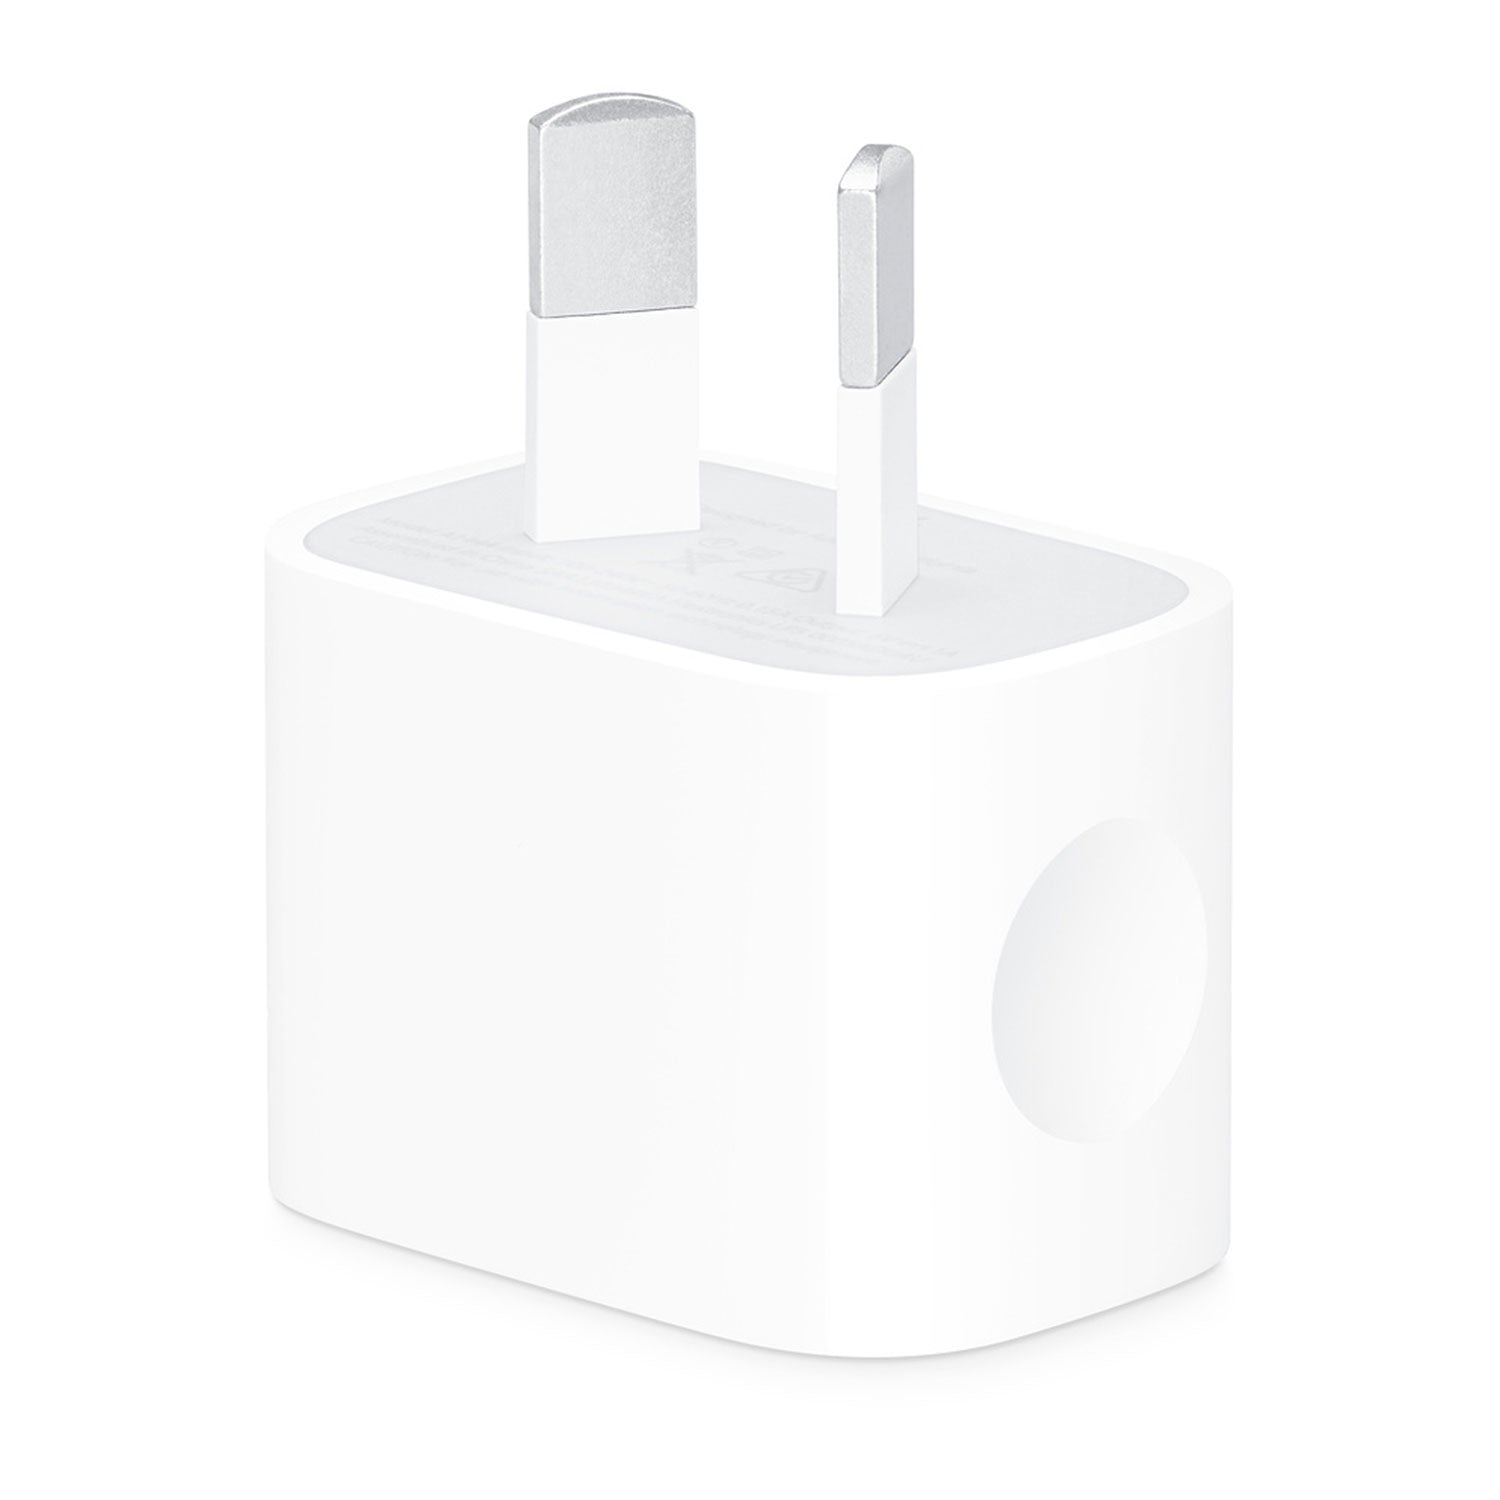 5W USB POWER ADAPTER FOR IPHONE - AU VERSION